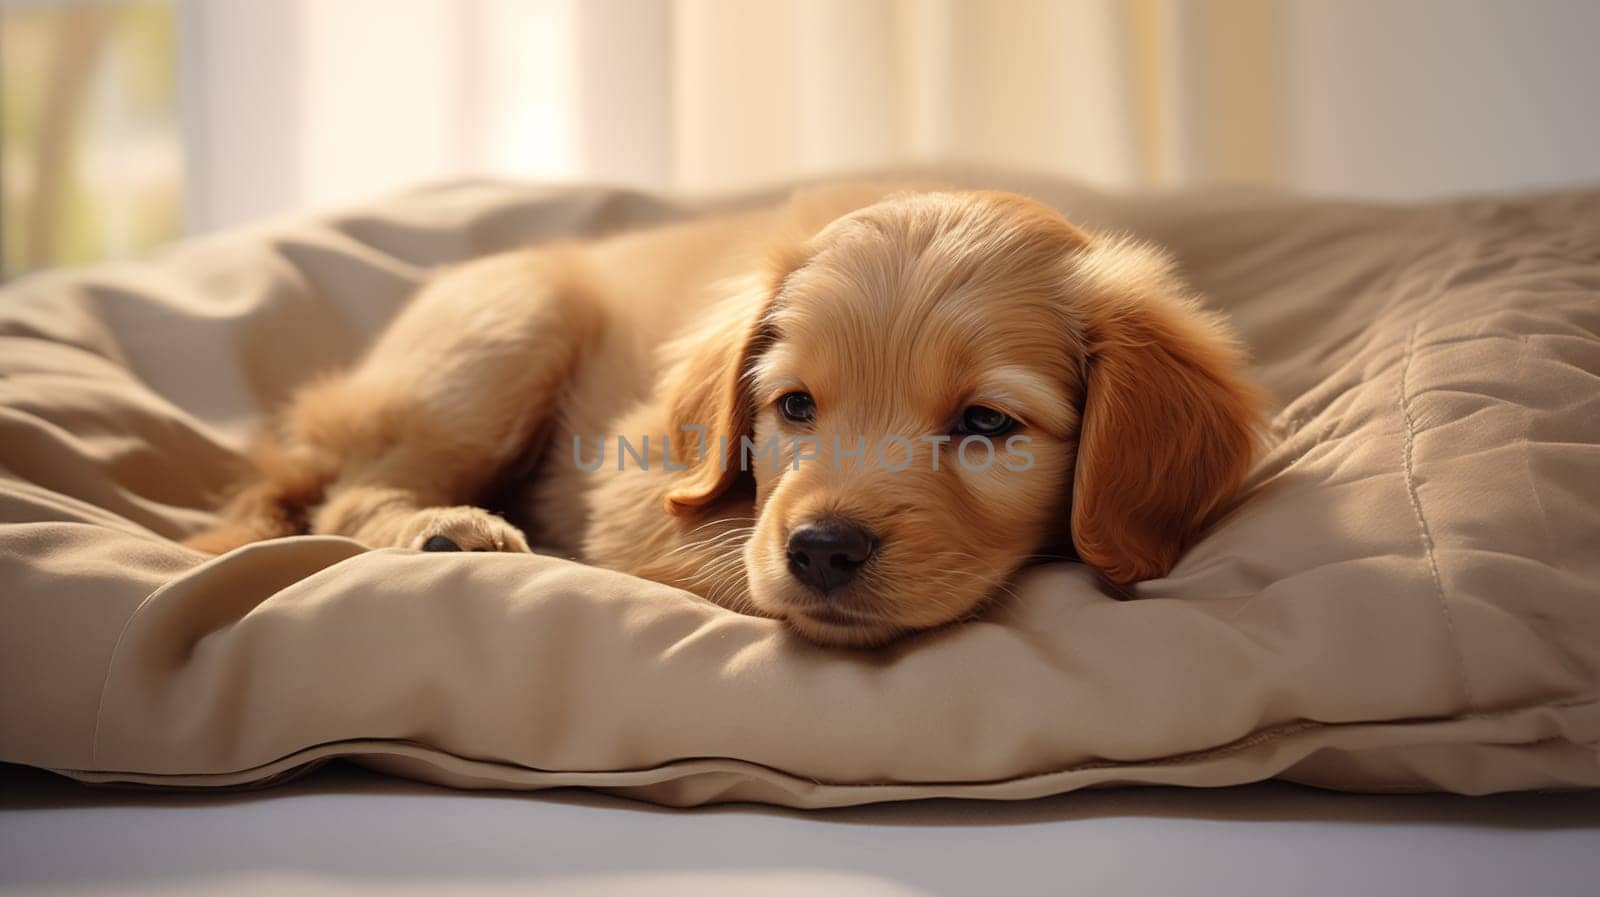 Cute ginger puppy lying on a cozy litter warm light.